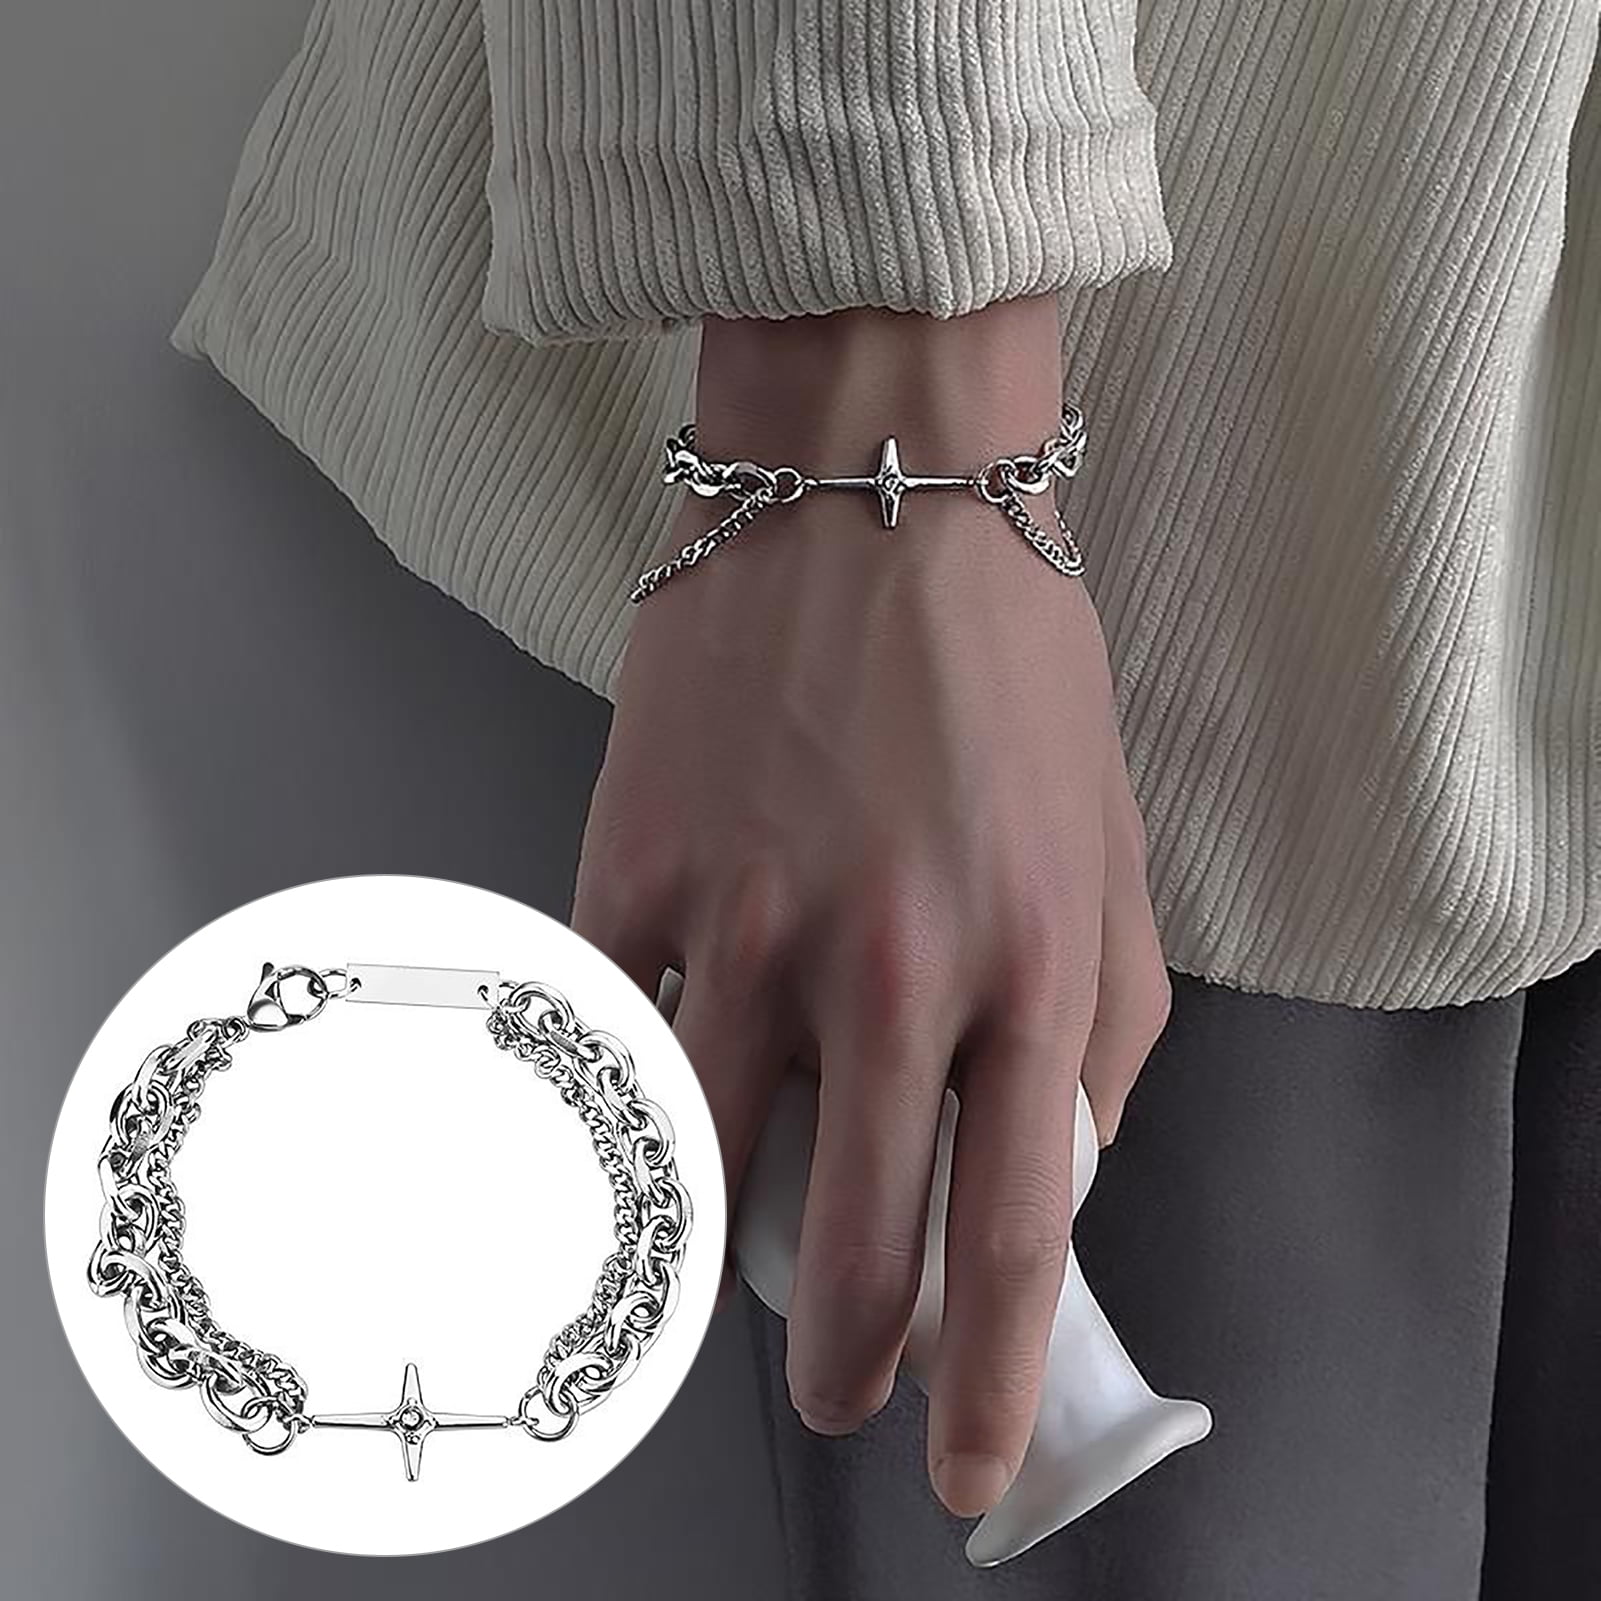 Stainless Steel/Mild Steel Hand Chain Bracelet at Rs 40 in Agra